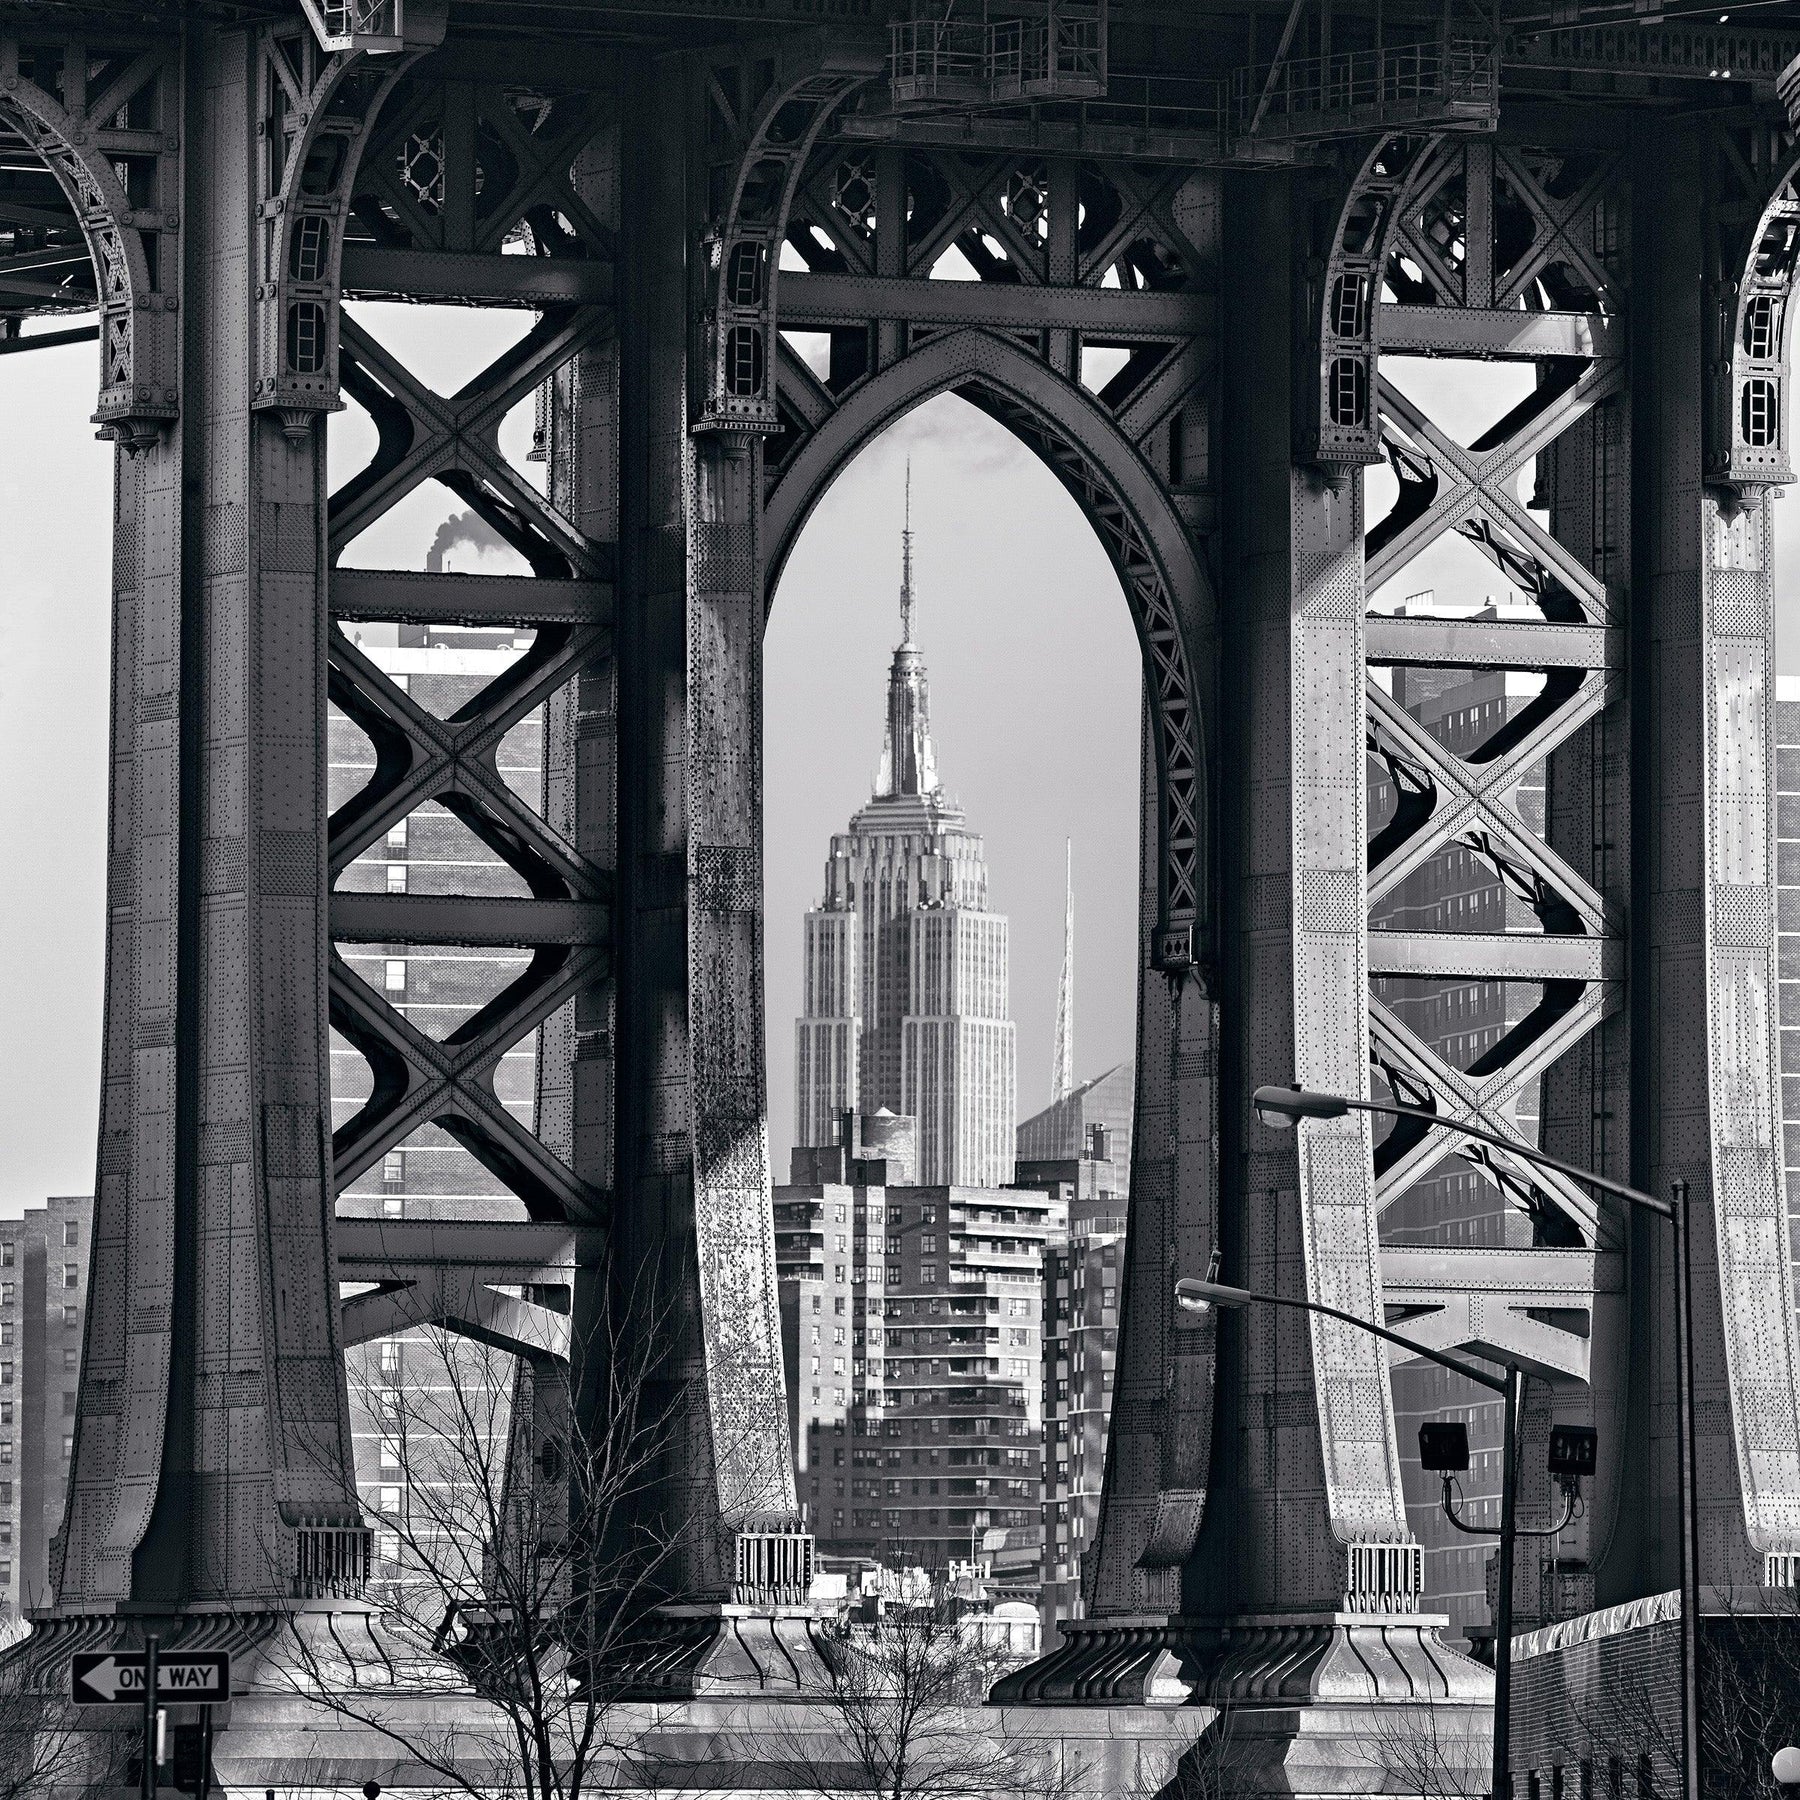 Black and white of the Empire State Building framed within the arches under the Manhattan Bridge New York